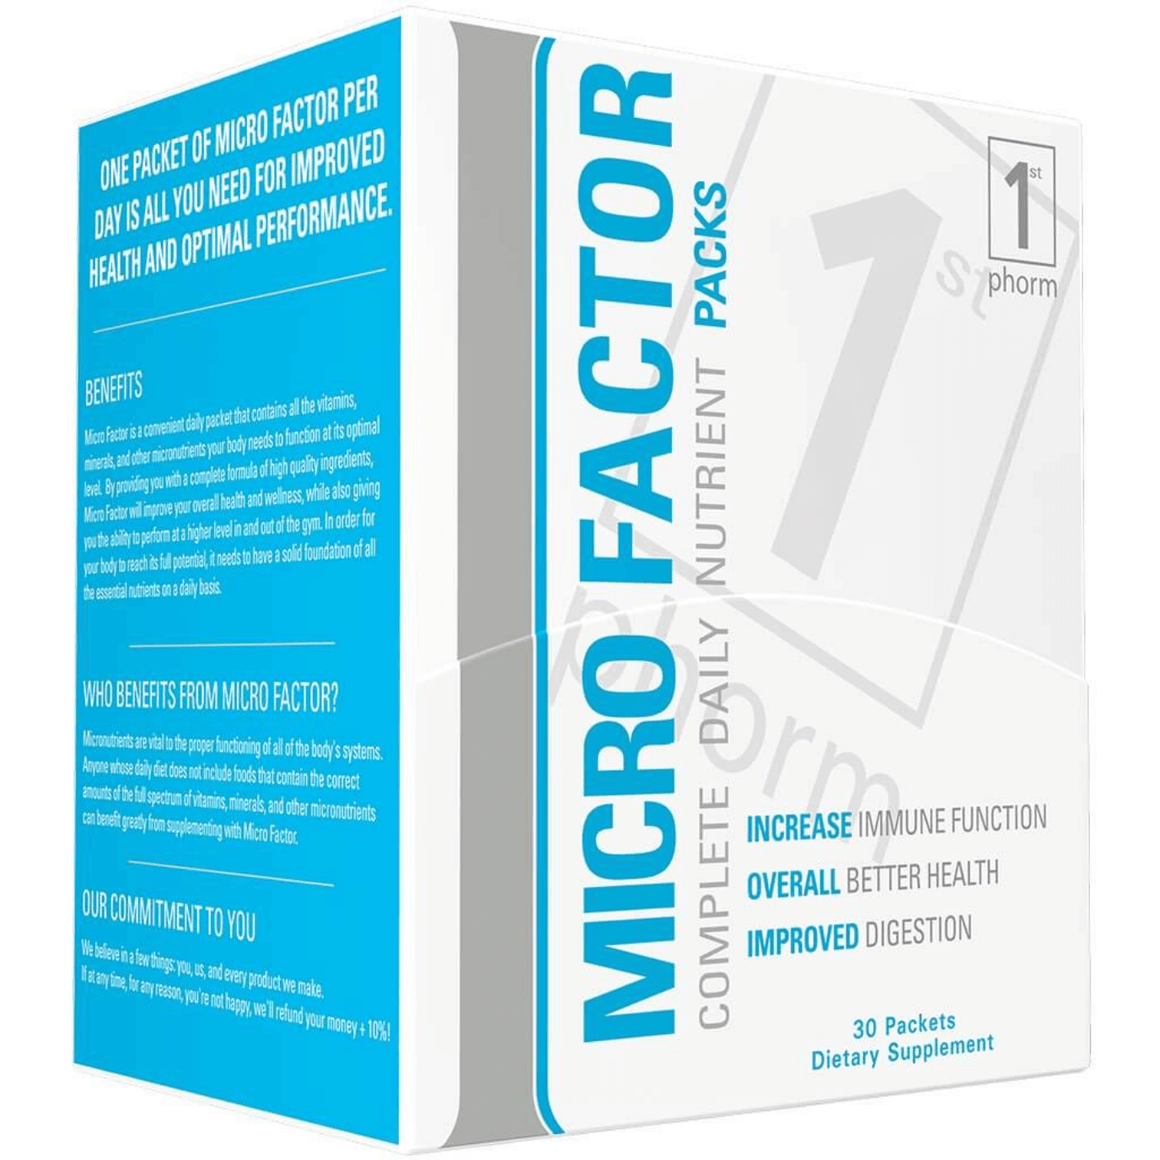 CALL FOR BEST PRICING! 1st Phorm - MicroFactor Complete Monthly Nutrition Pack Call Us To Order! 817-301-6816 DESCRIPTION Micro Factor is a convenient daily packet that contains all the vitamins, minerals, and other micronutrients your body needs to funct